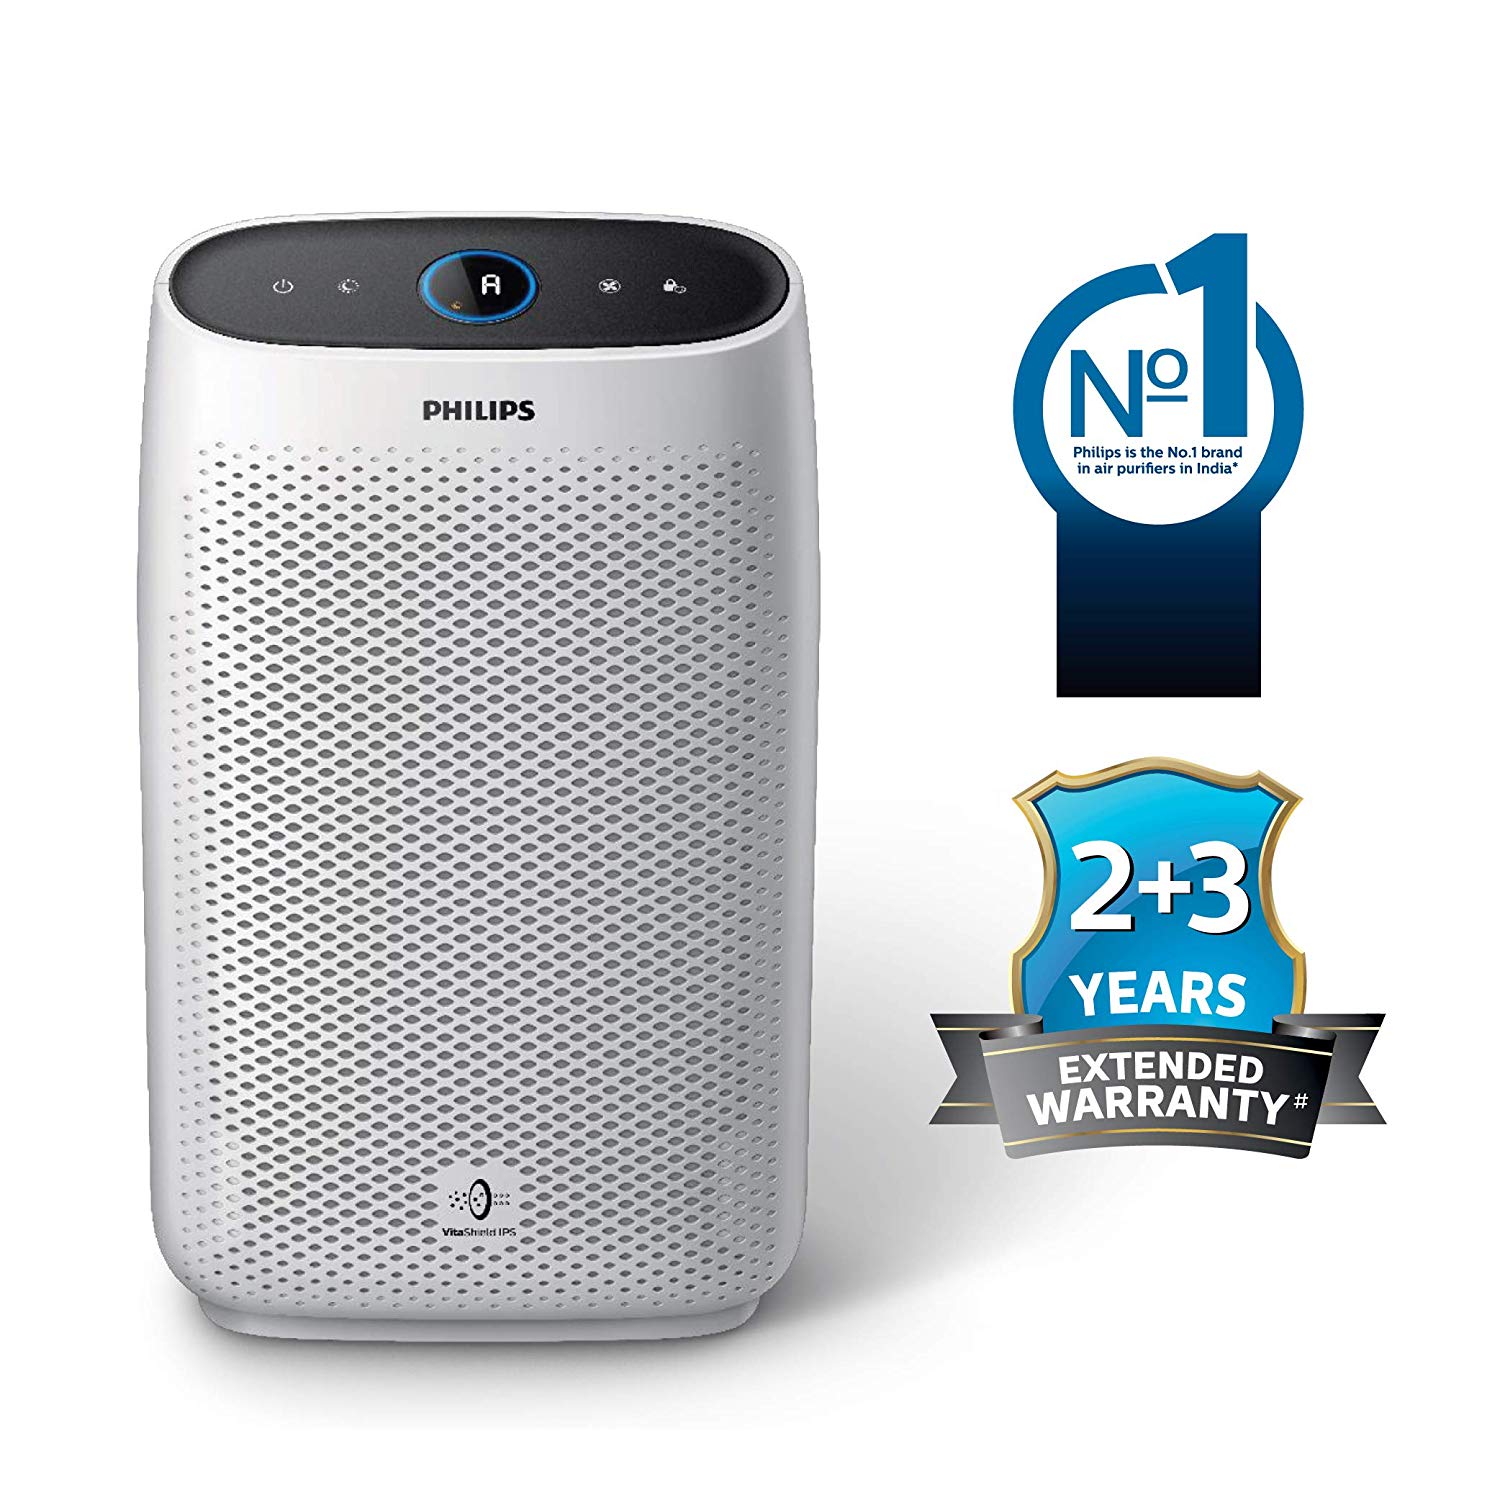 Top 5 Best air purifiers in India 2020